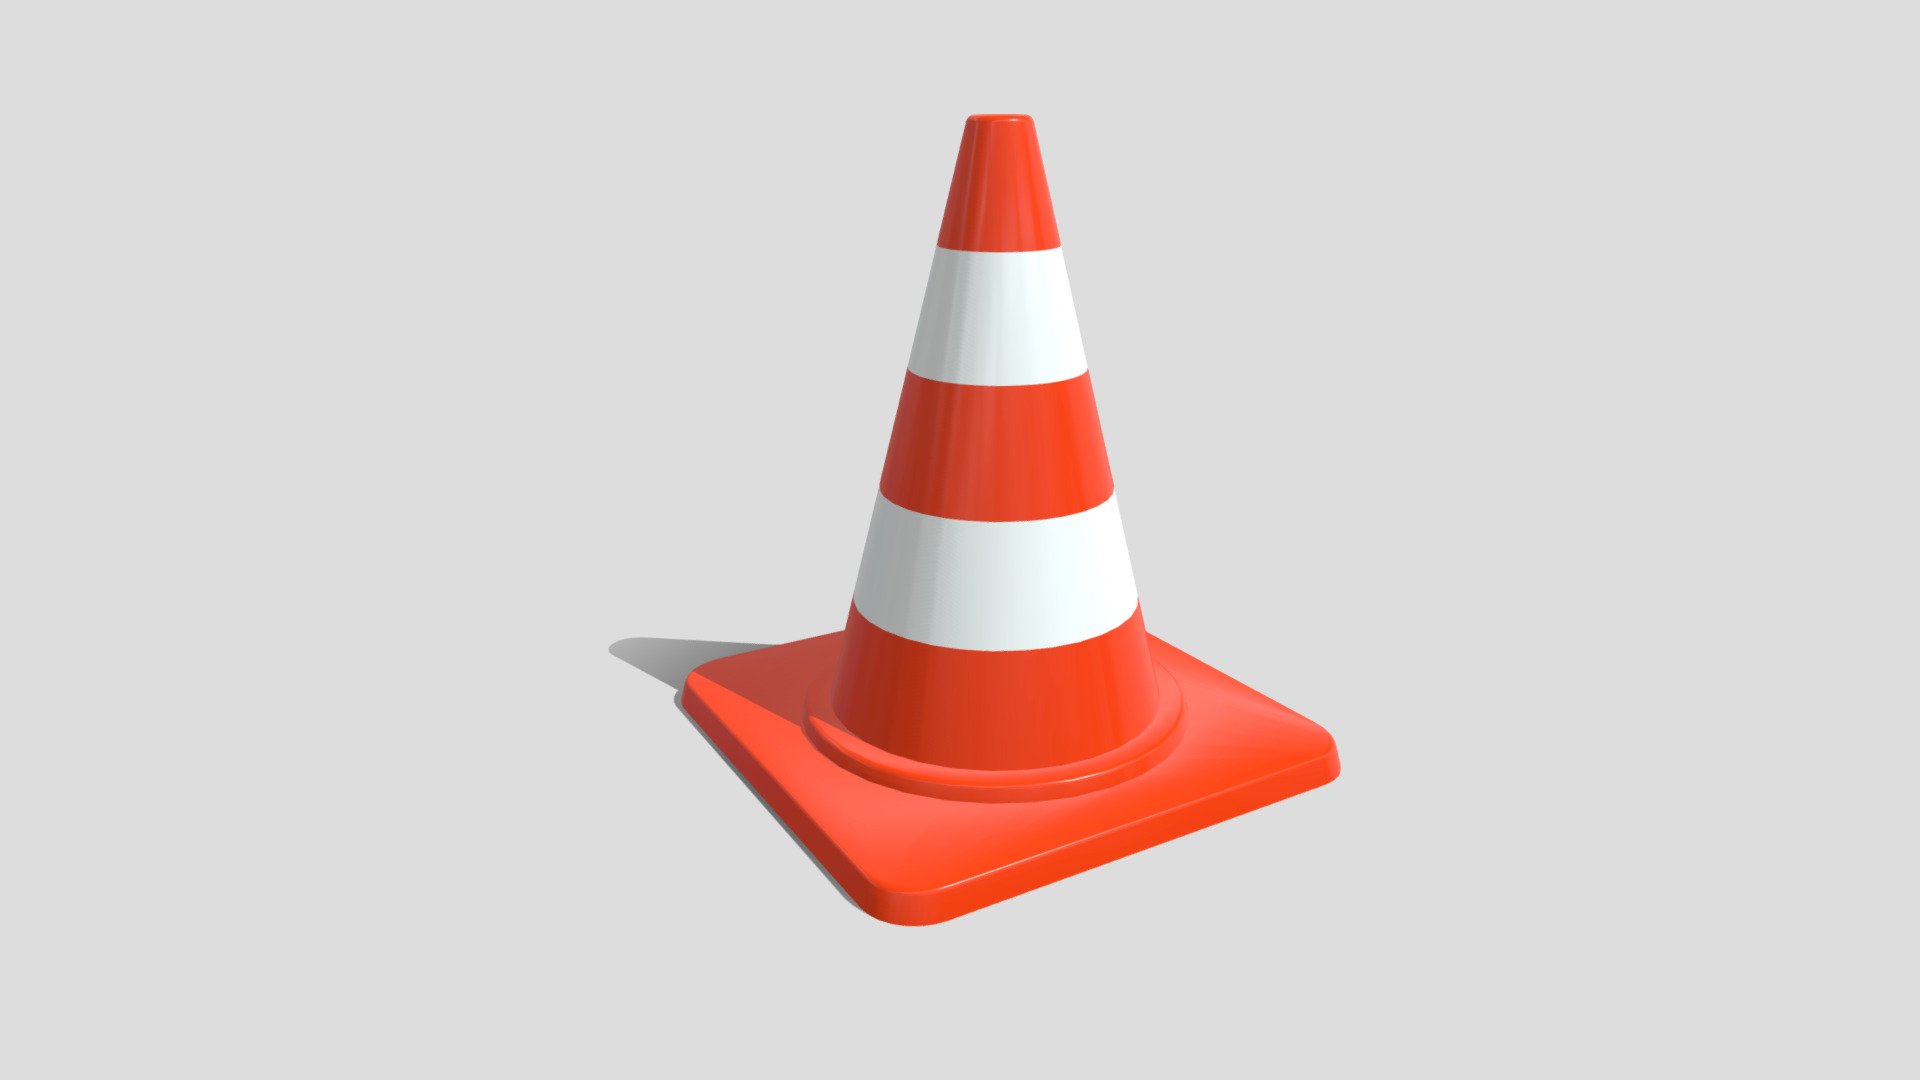 Low poly 3d model of traffic cone used to regulate vehicle and pedestrian movement - Orange Traffic Cone - Buy Royalty Free 3D model by assetfactory 3d model